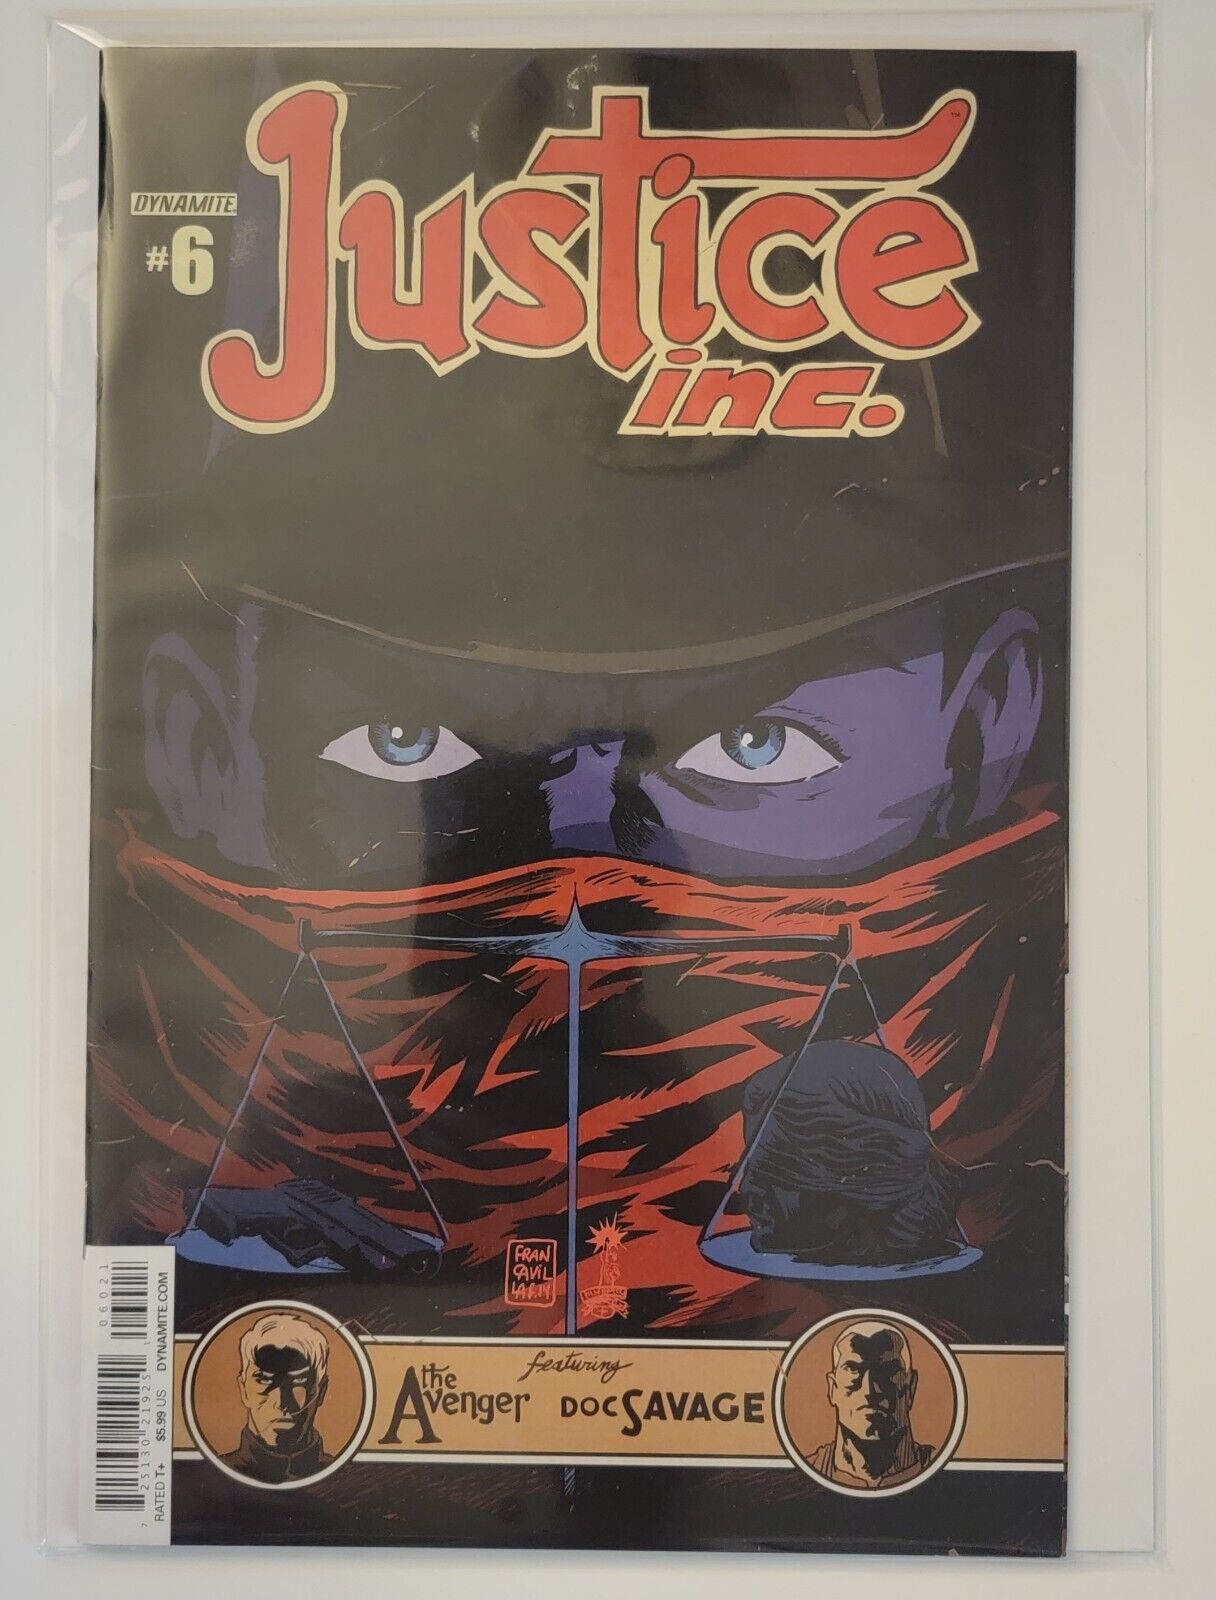 Justice Inc. Featuring The Avenger Savage Dynamite Comics #6 Bagged and Boarded